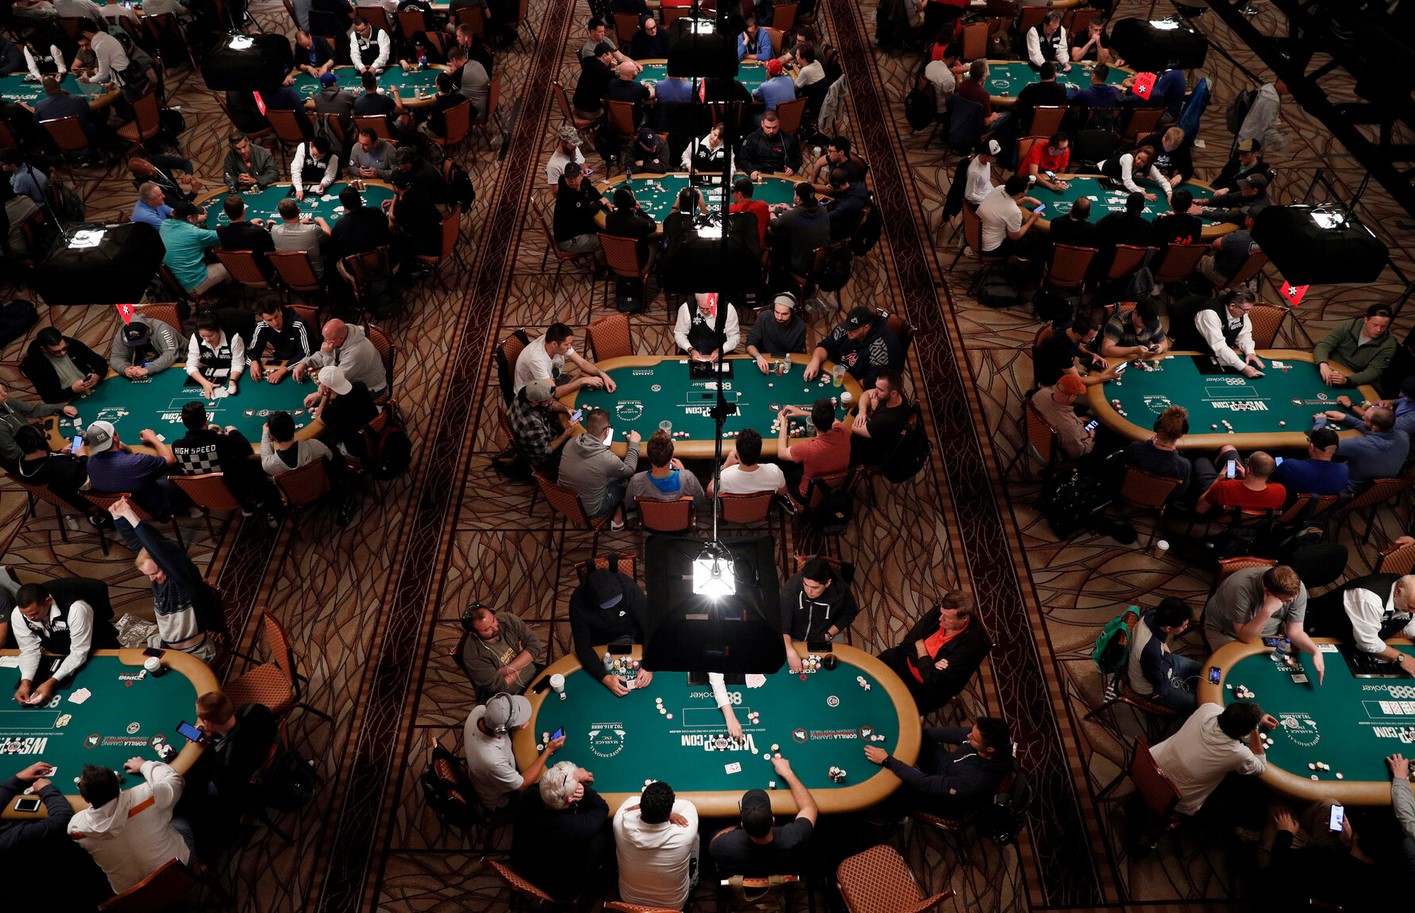 mtt tournaments or cash games: which is better for playing poker? | habwin